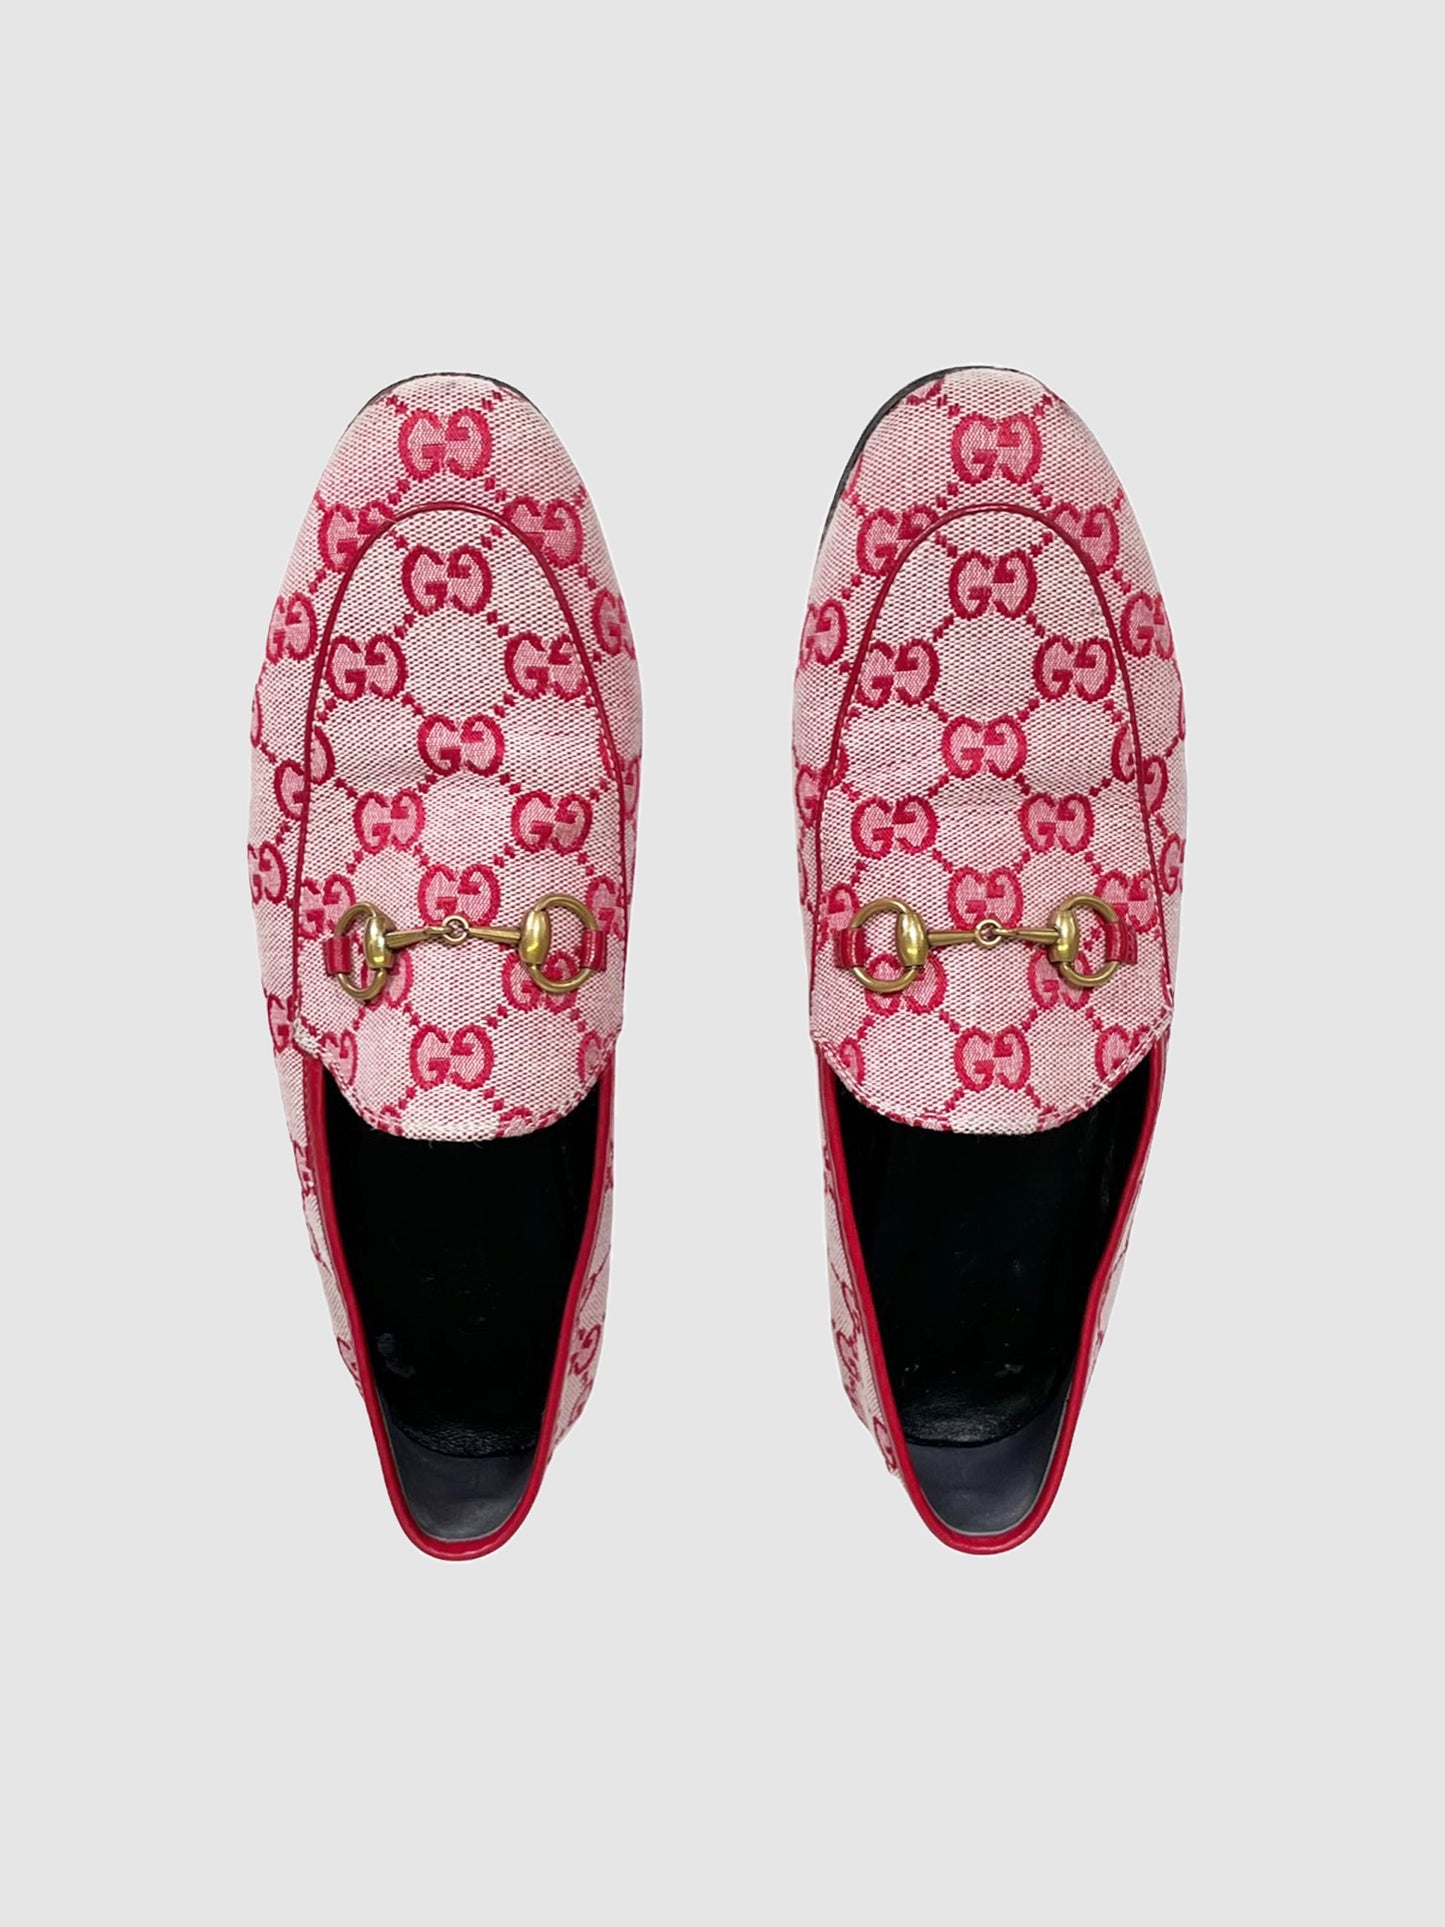 Gucci Canvas Monogram Loafers - Size 37.5